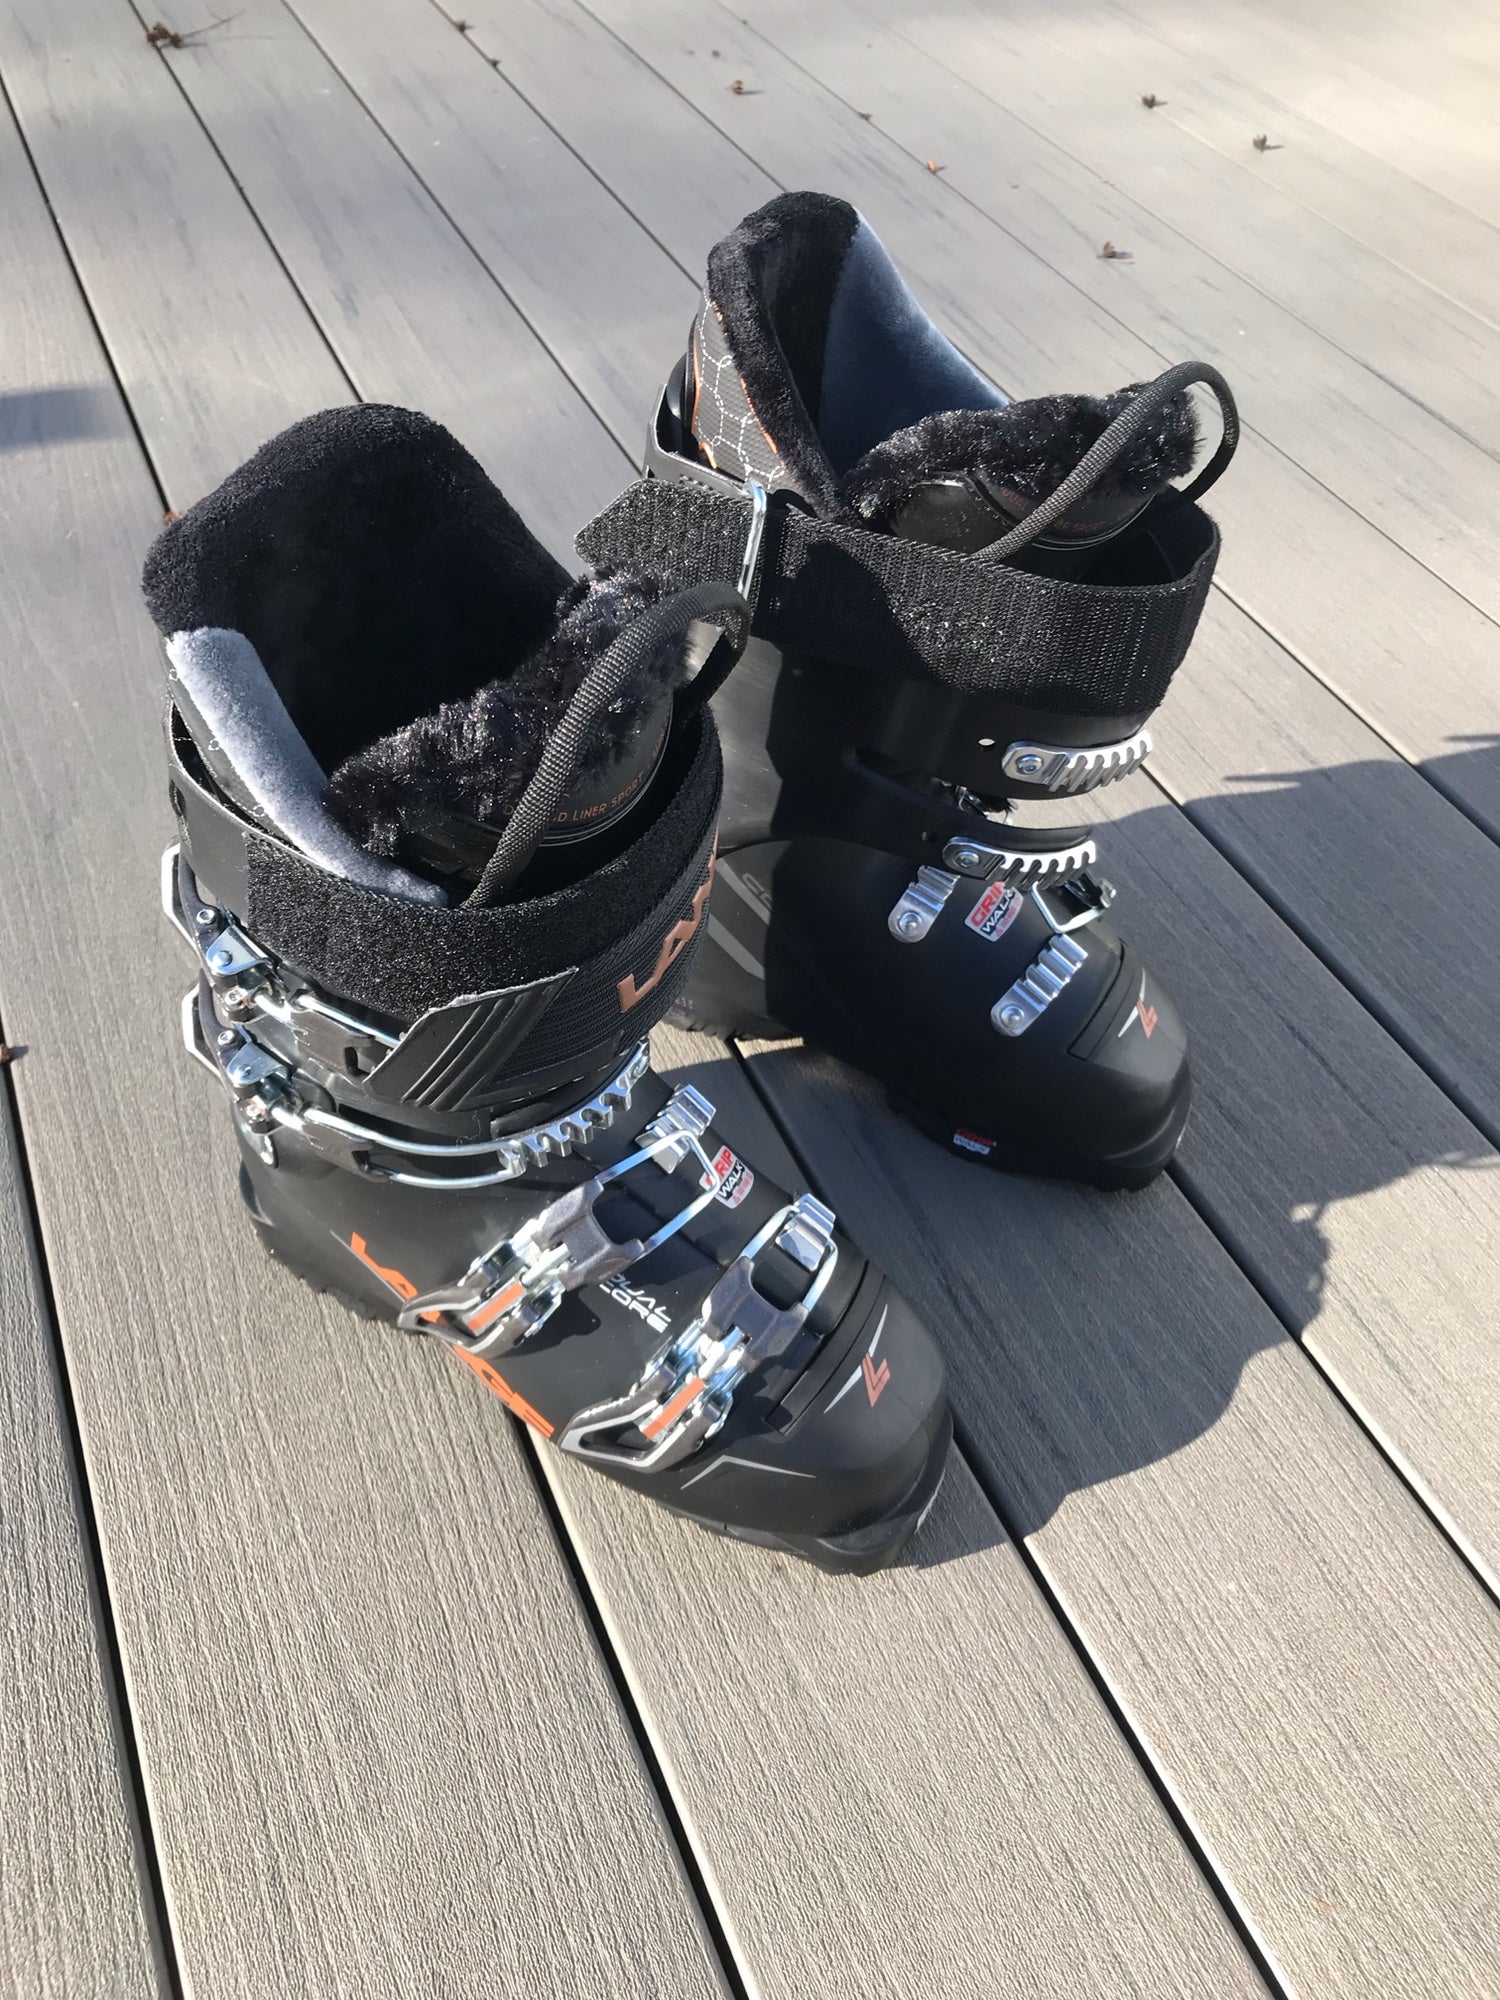 Louis Vuitton Ski Boots (New With Box)